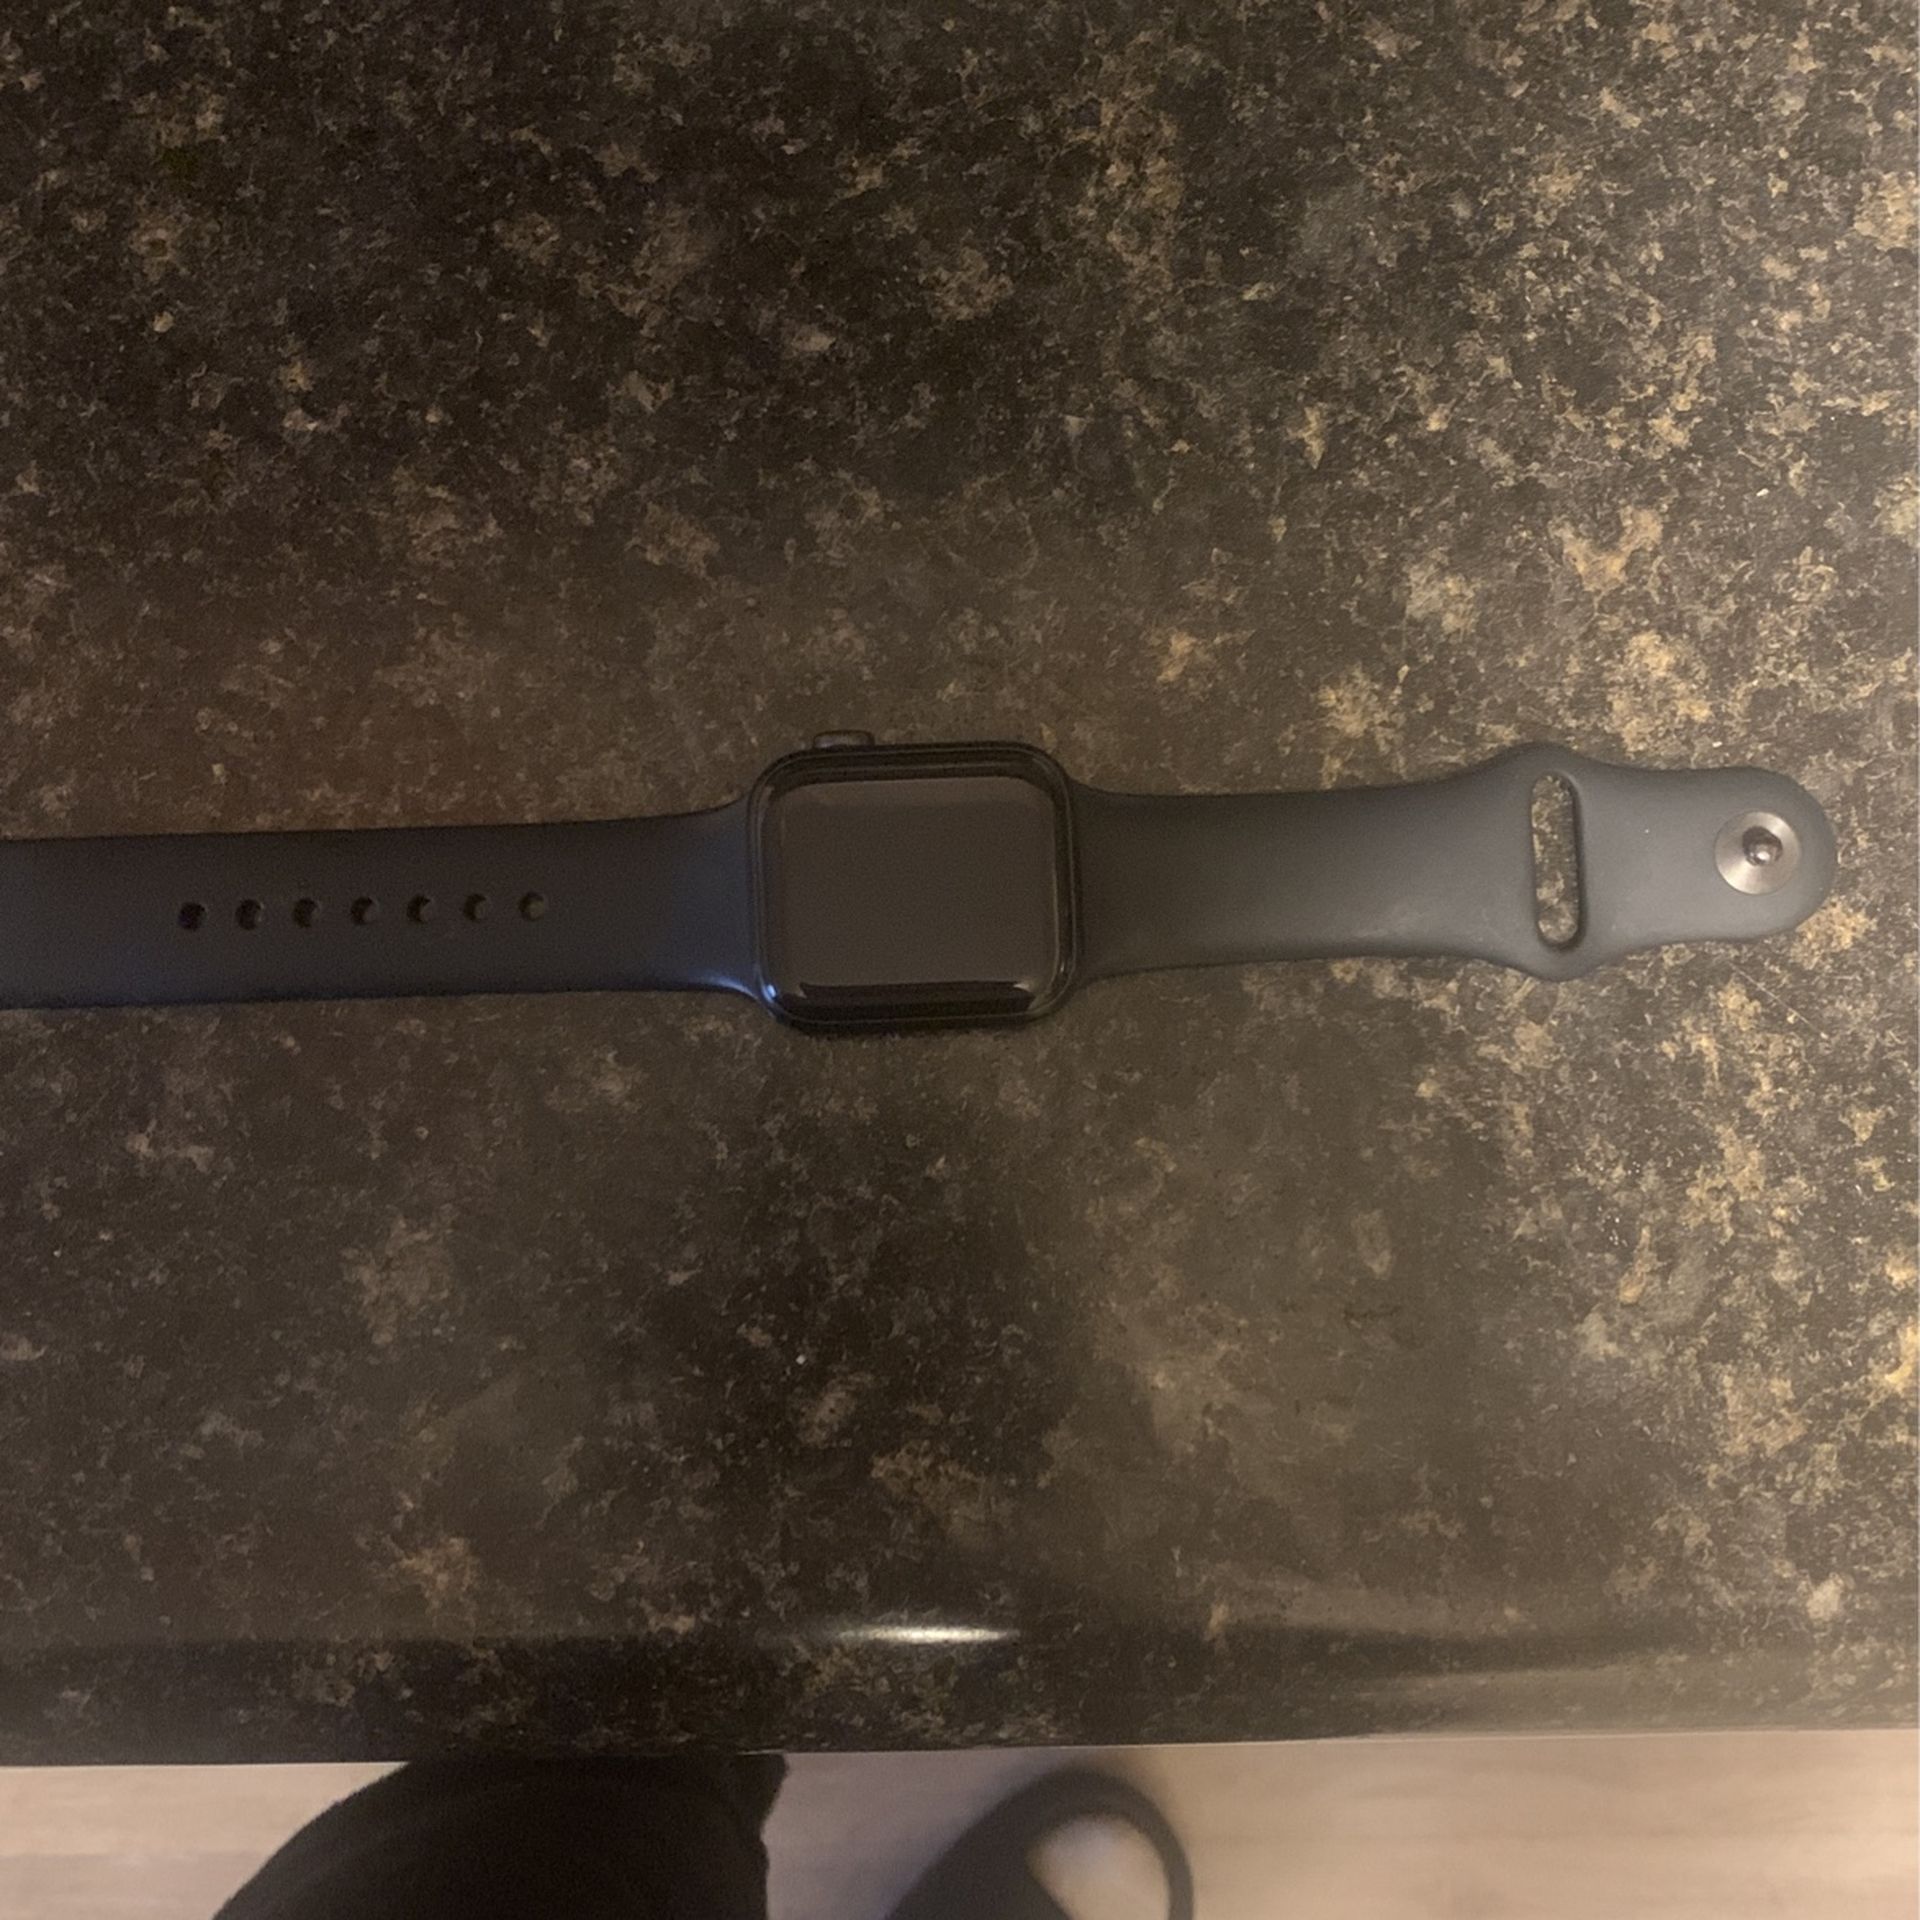 Barely Used apple watch